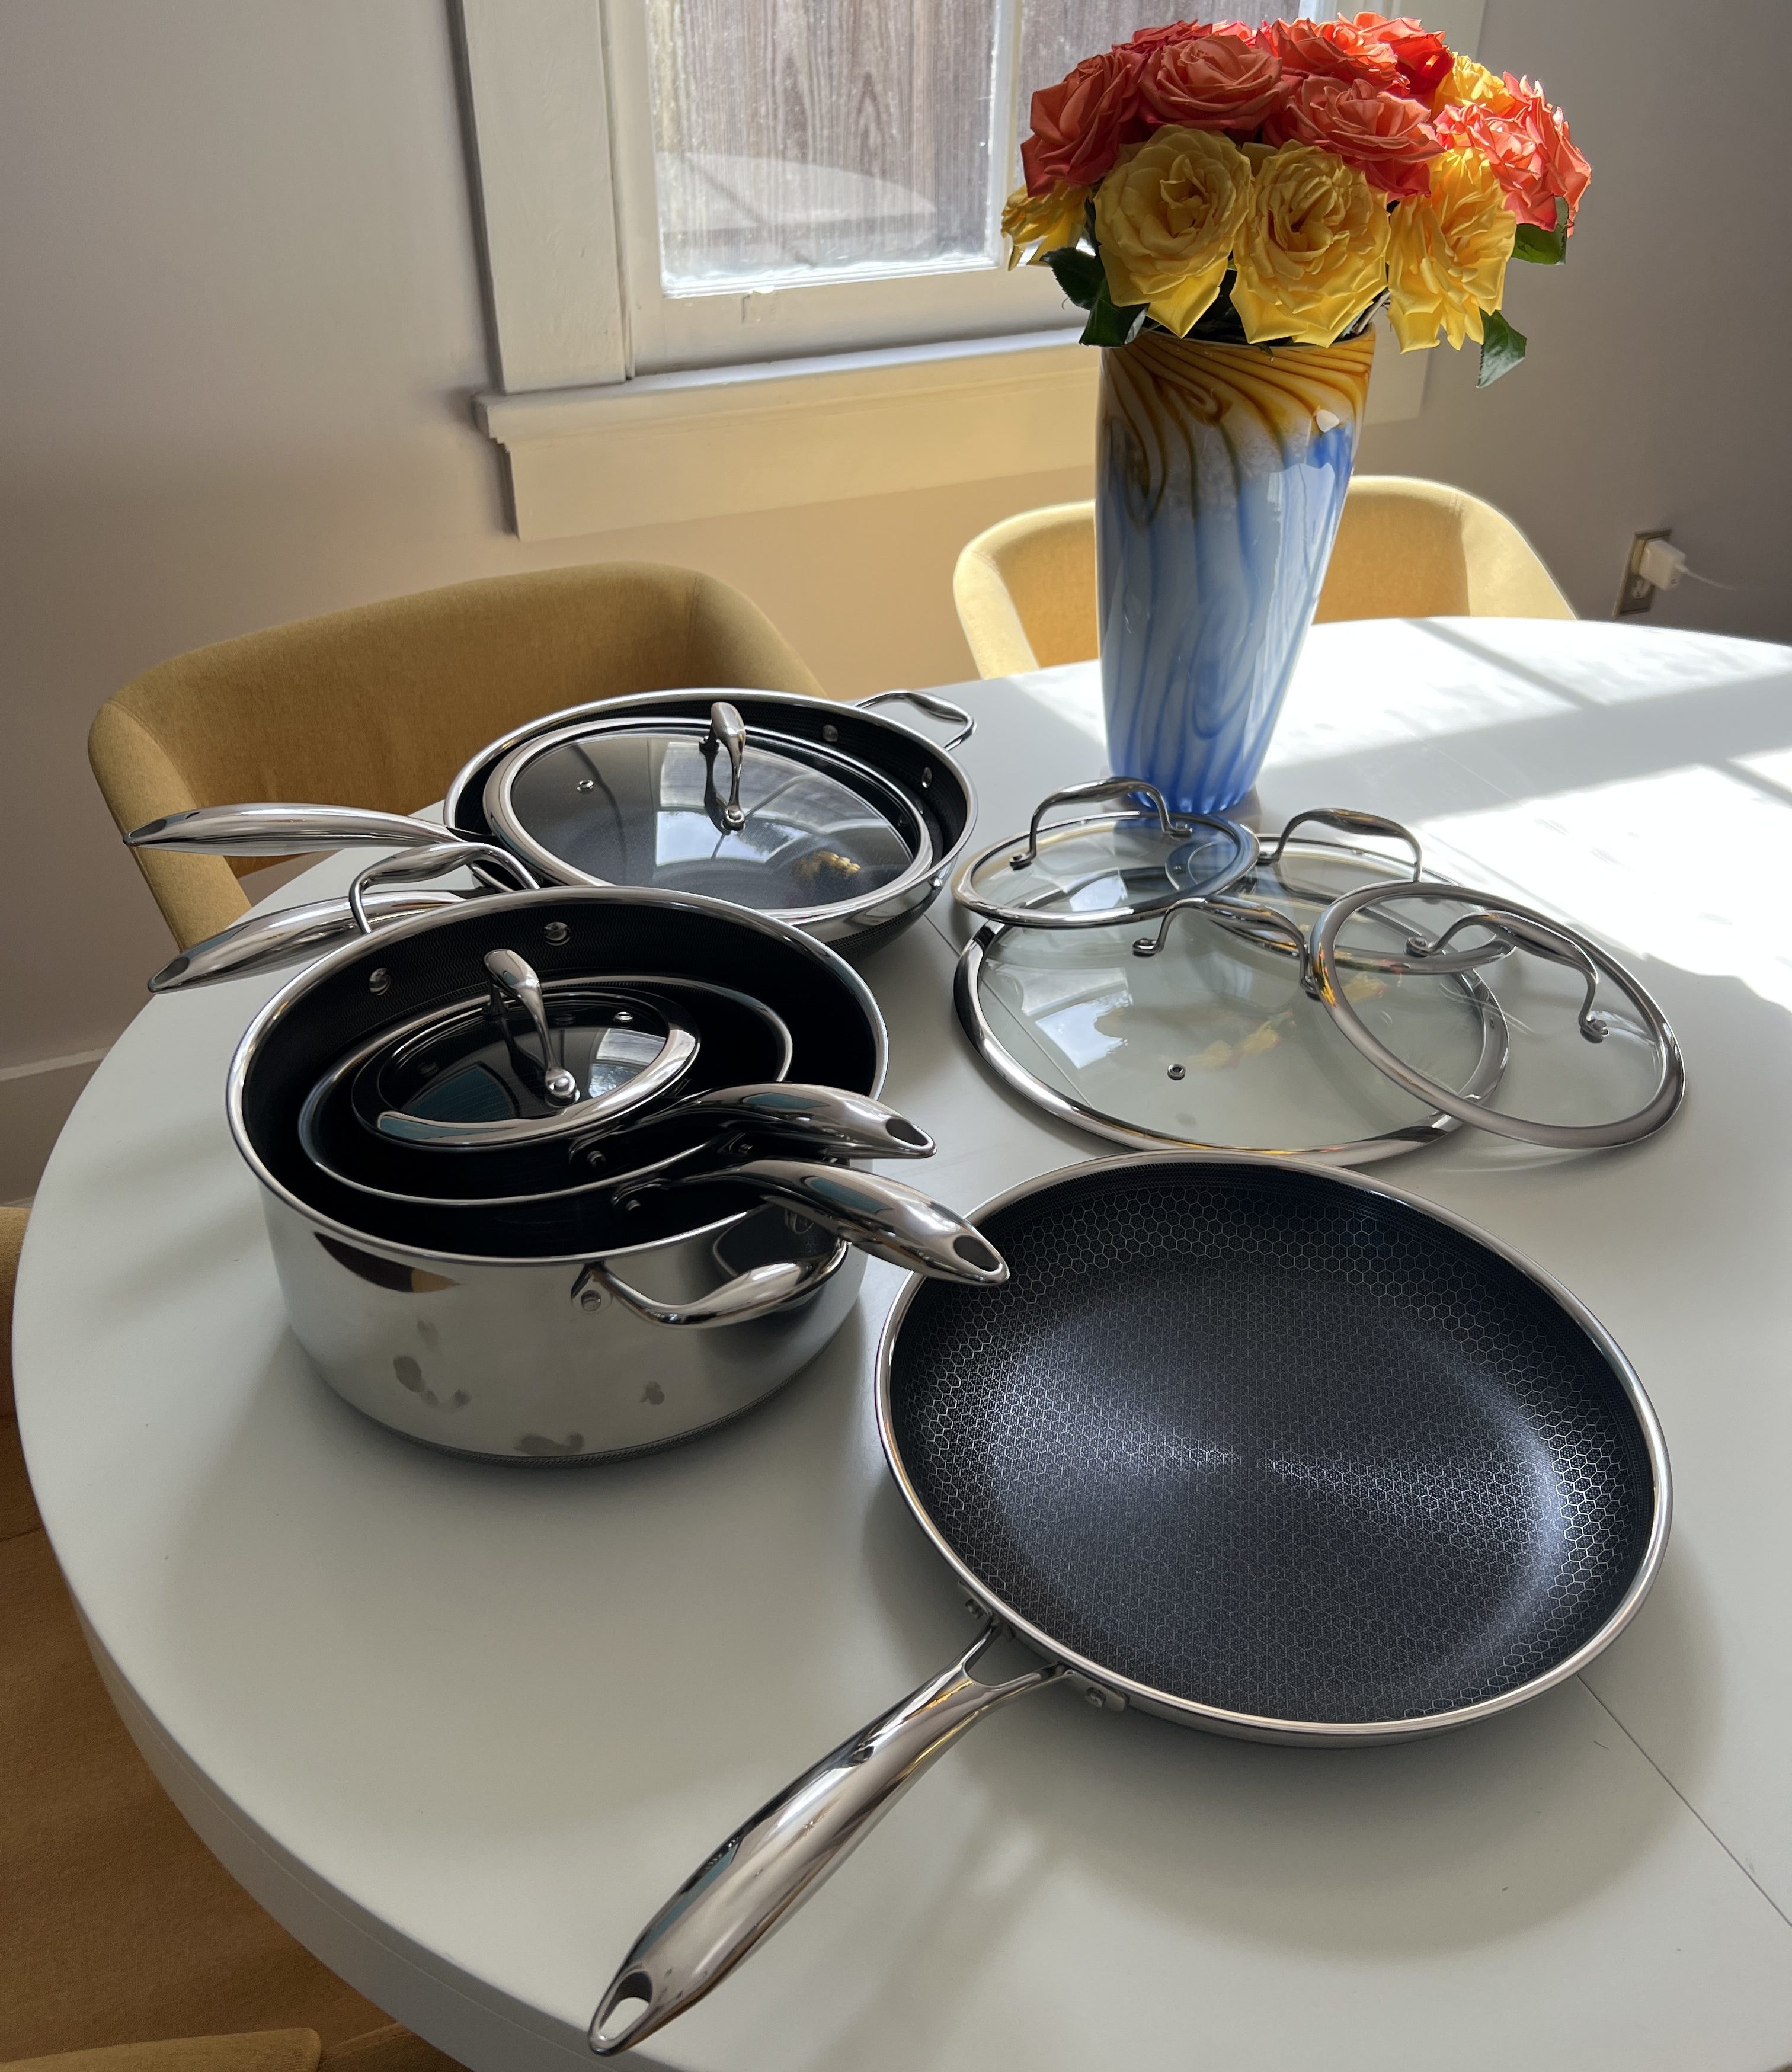 All-Clad vs. Le Creuset: Which Stainless Steel Cookware Is Better? -  Prudent Reviews